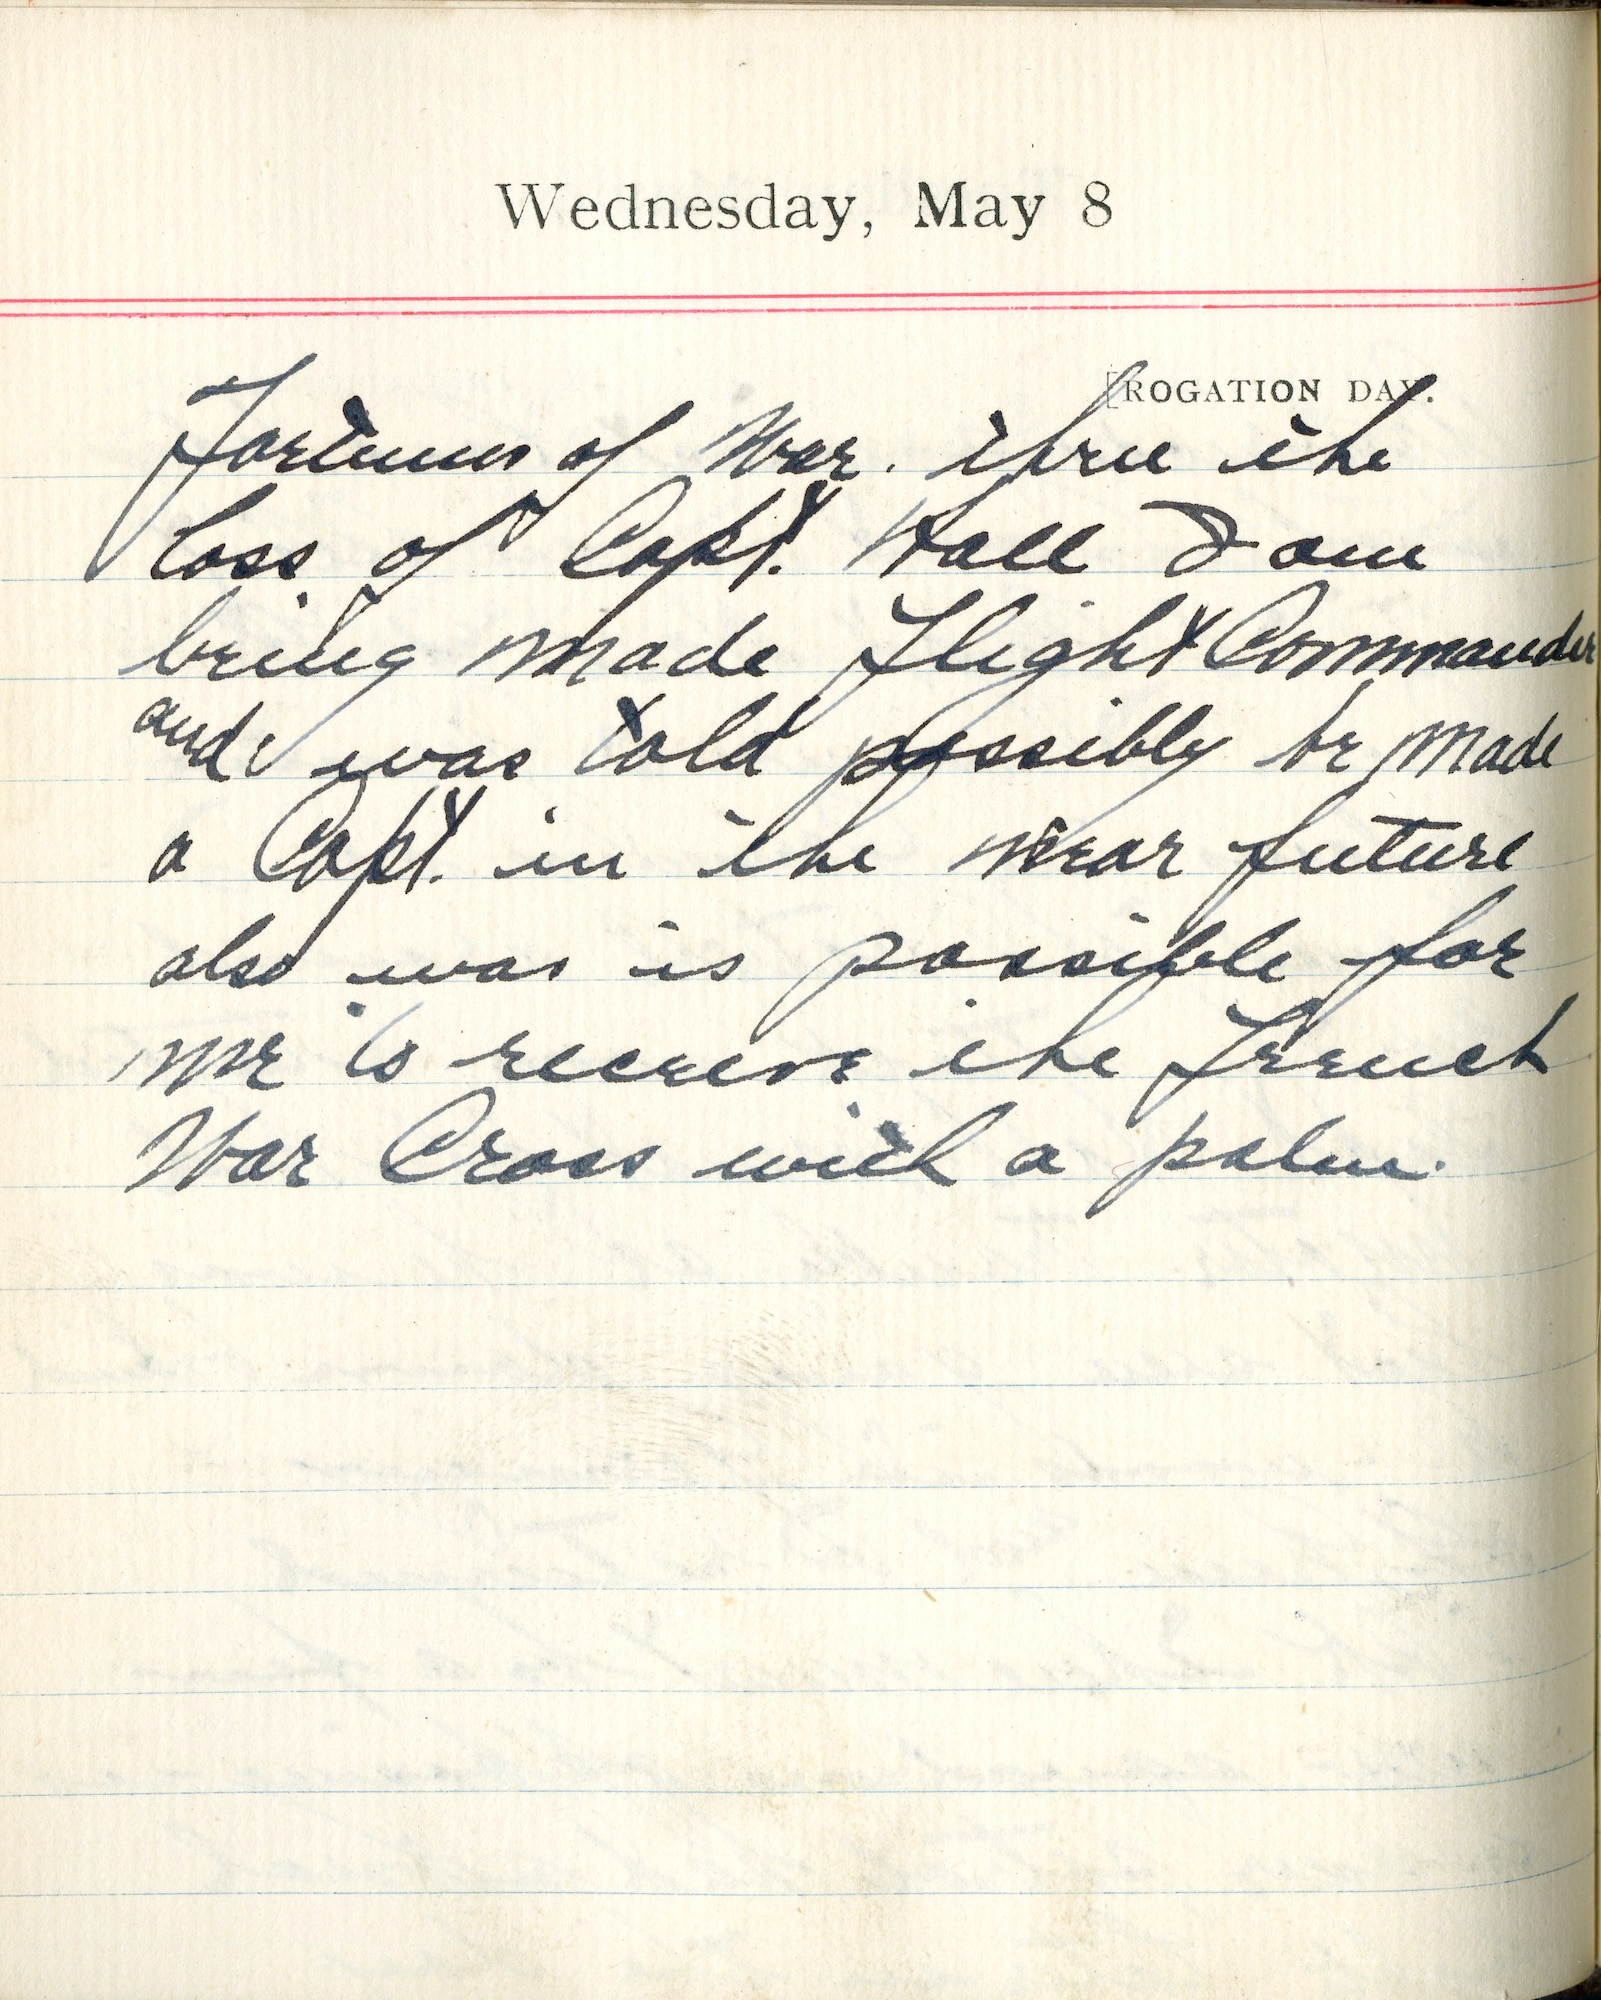 Capt. Edward V. Rickenbacker's 1918 wartime diary entry. (05/08/1918).

Fortunes of war.  Thru the loss of Capt. Hall I am being made Flight Commander and was told possibly be made a Capt. in the near future.  Also was is possible for me to receive the French War Cross with a palm.